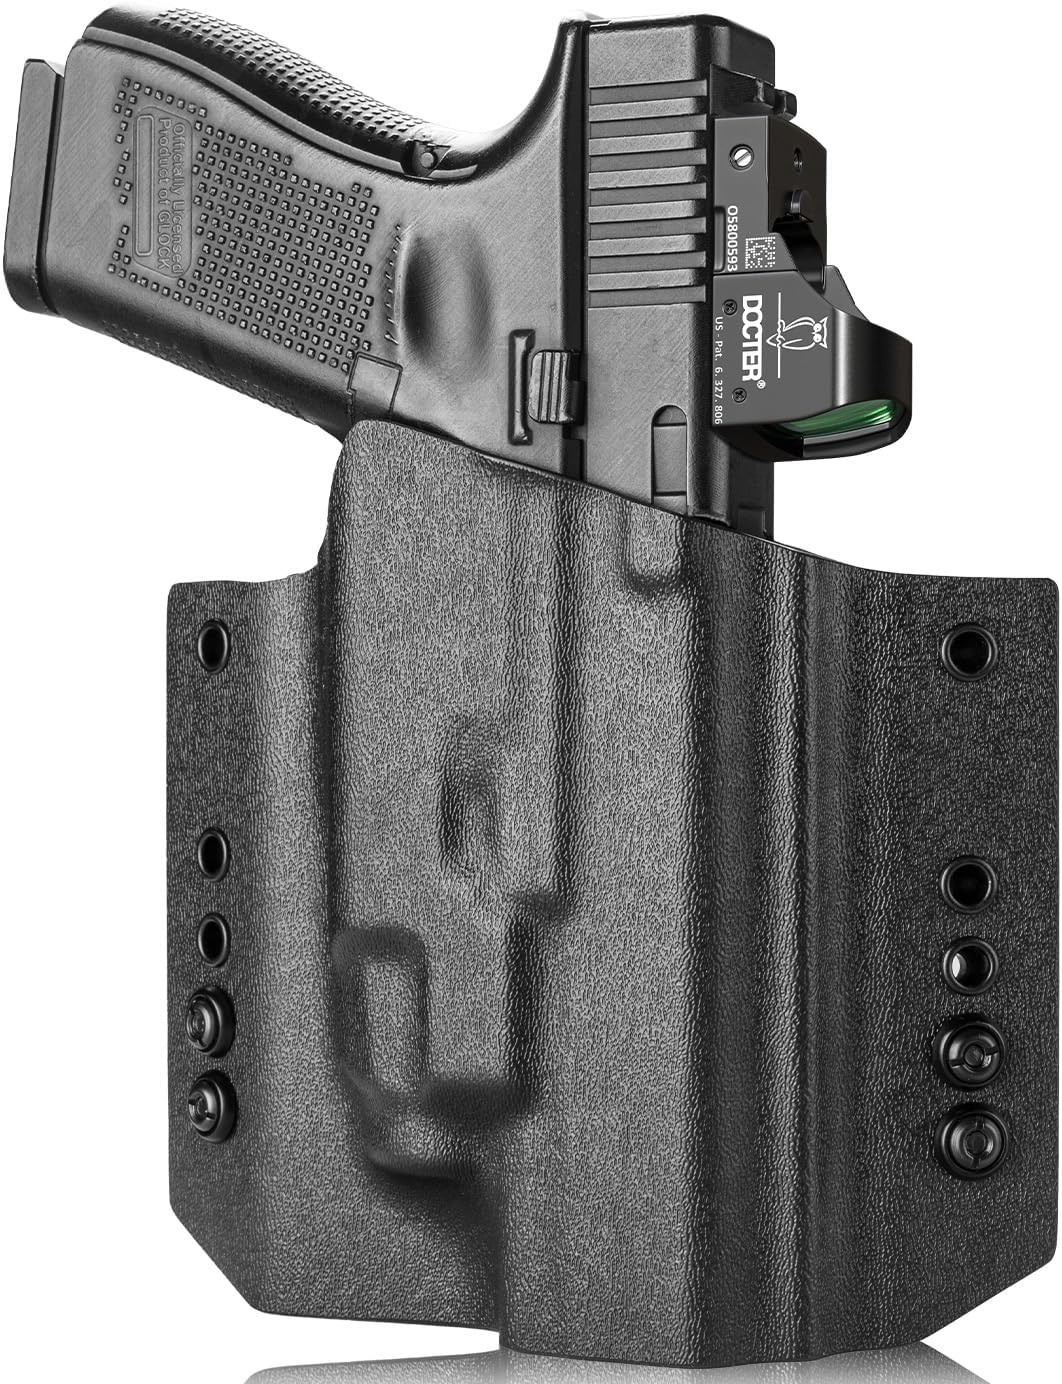 Glock 17/19 TLR7/TLR7A Holster OWB Kydex Holster Optic Cut Fit: Glock 17 G19 G44 G45 GEN 1-5 G23 G32 Gen 3-4 w/TLR-7 TLR-7A, Outside Waistband Carry Holster, Right Hand | Warriorland